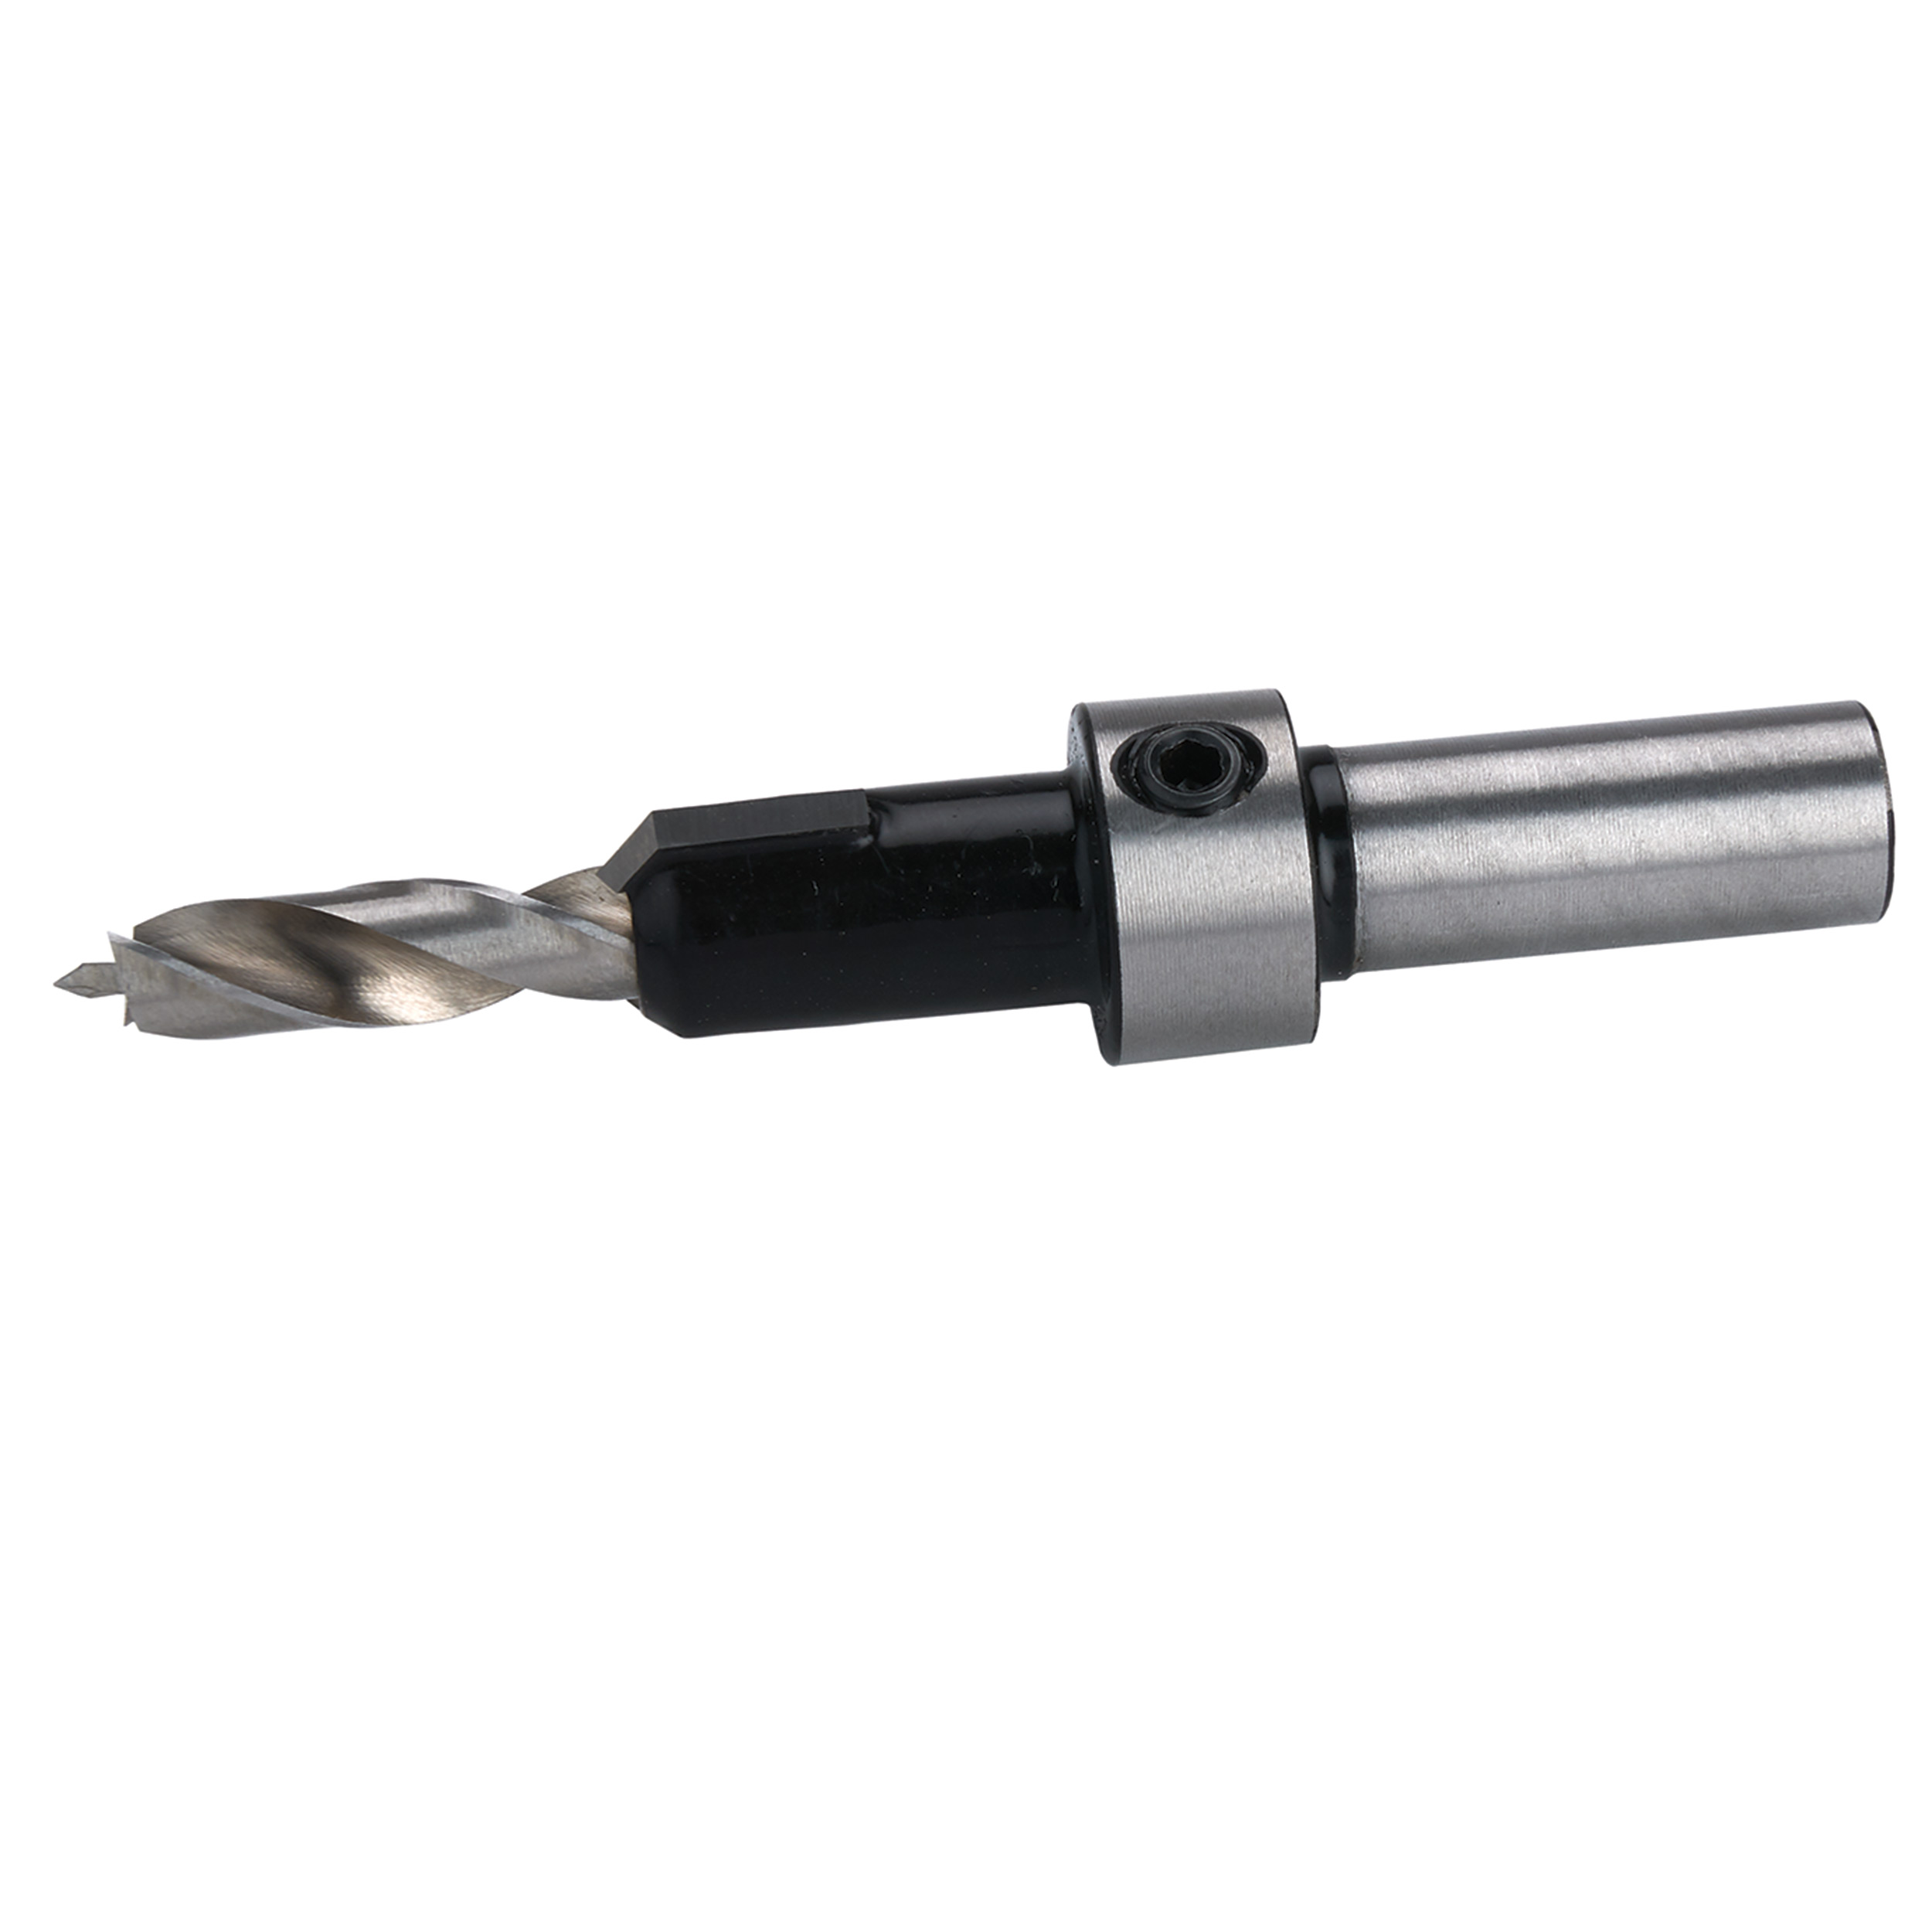 1/4" X 1/2" Carbide-tipped Countersink Set With Brad Point Pilot